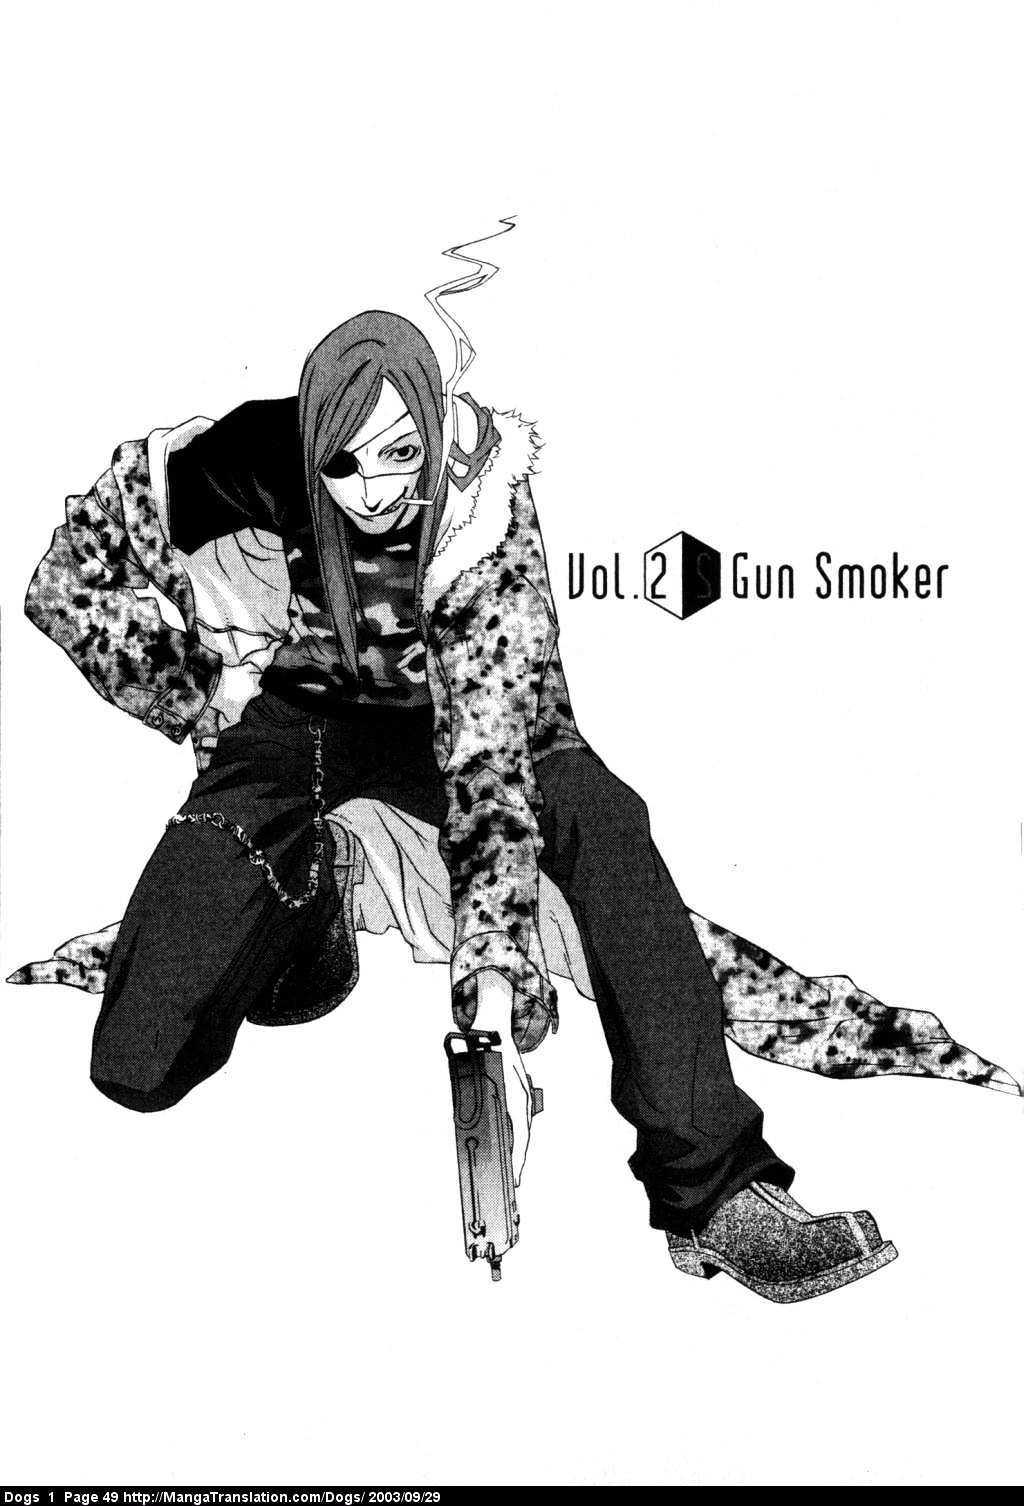 Dogs: Stray Dogs Howling In The Dark Vol.1 Chapter 2 : Gun Smoker - Picture 3